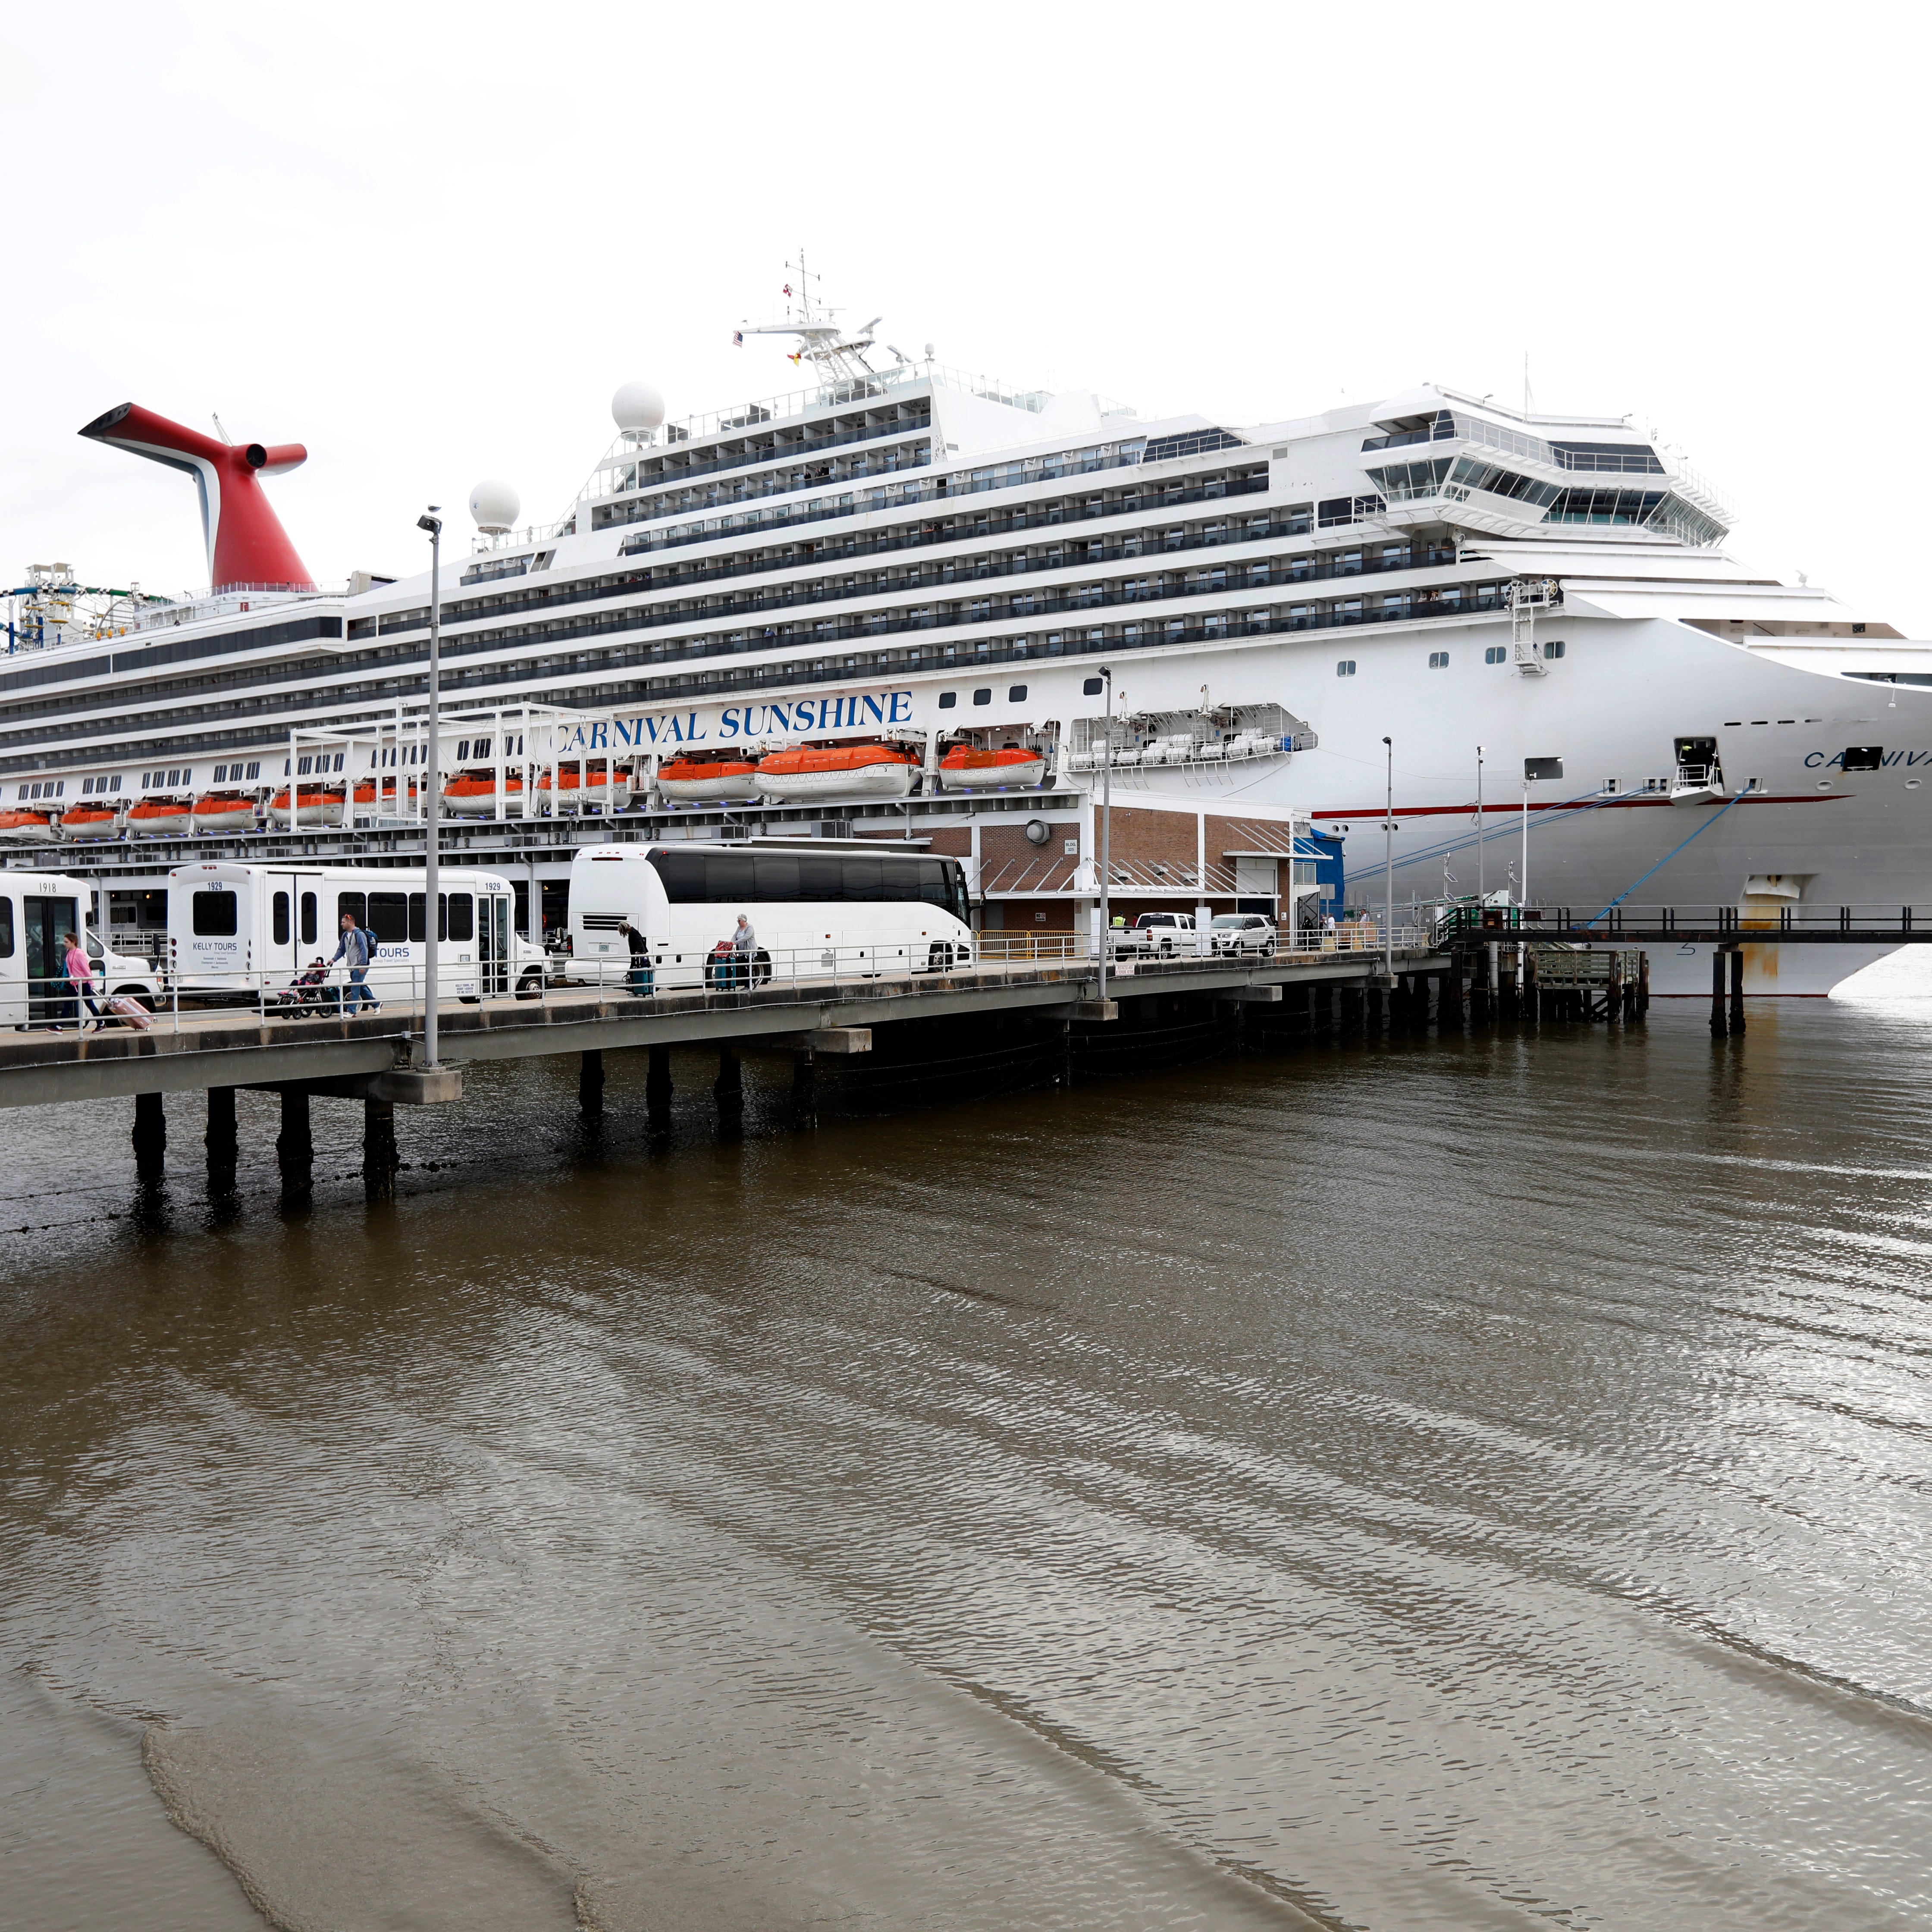 Passengers disembark from the Carnival Sunshine cruise ship Monday, March 16, 2020, in Charleston, S.C.